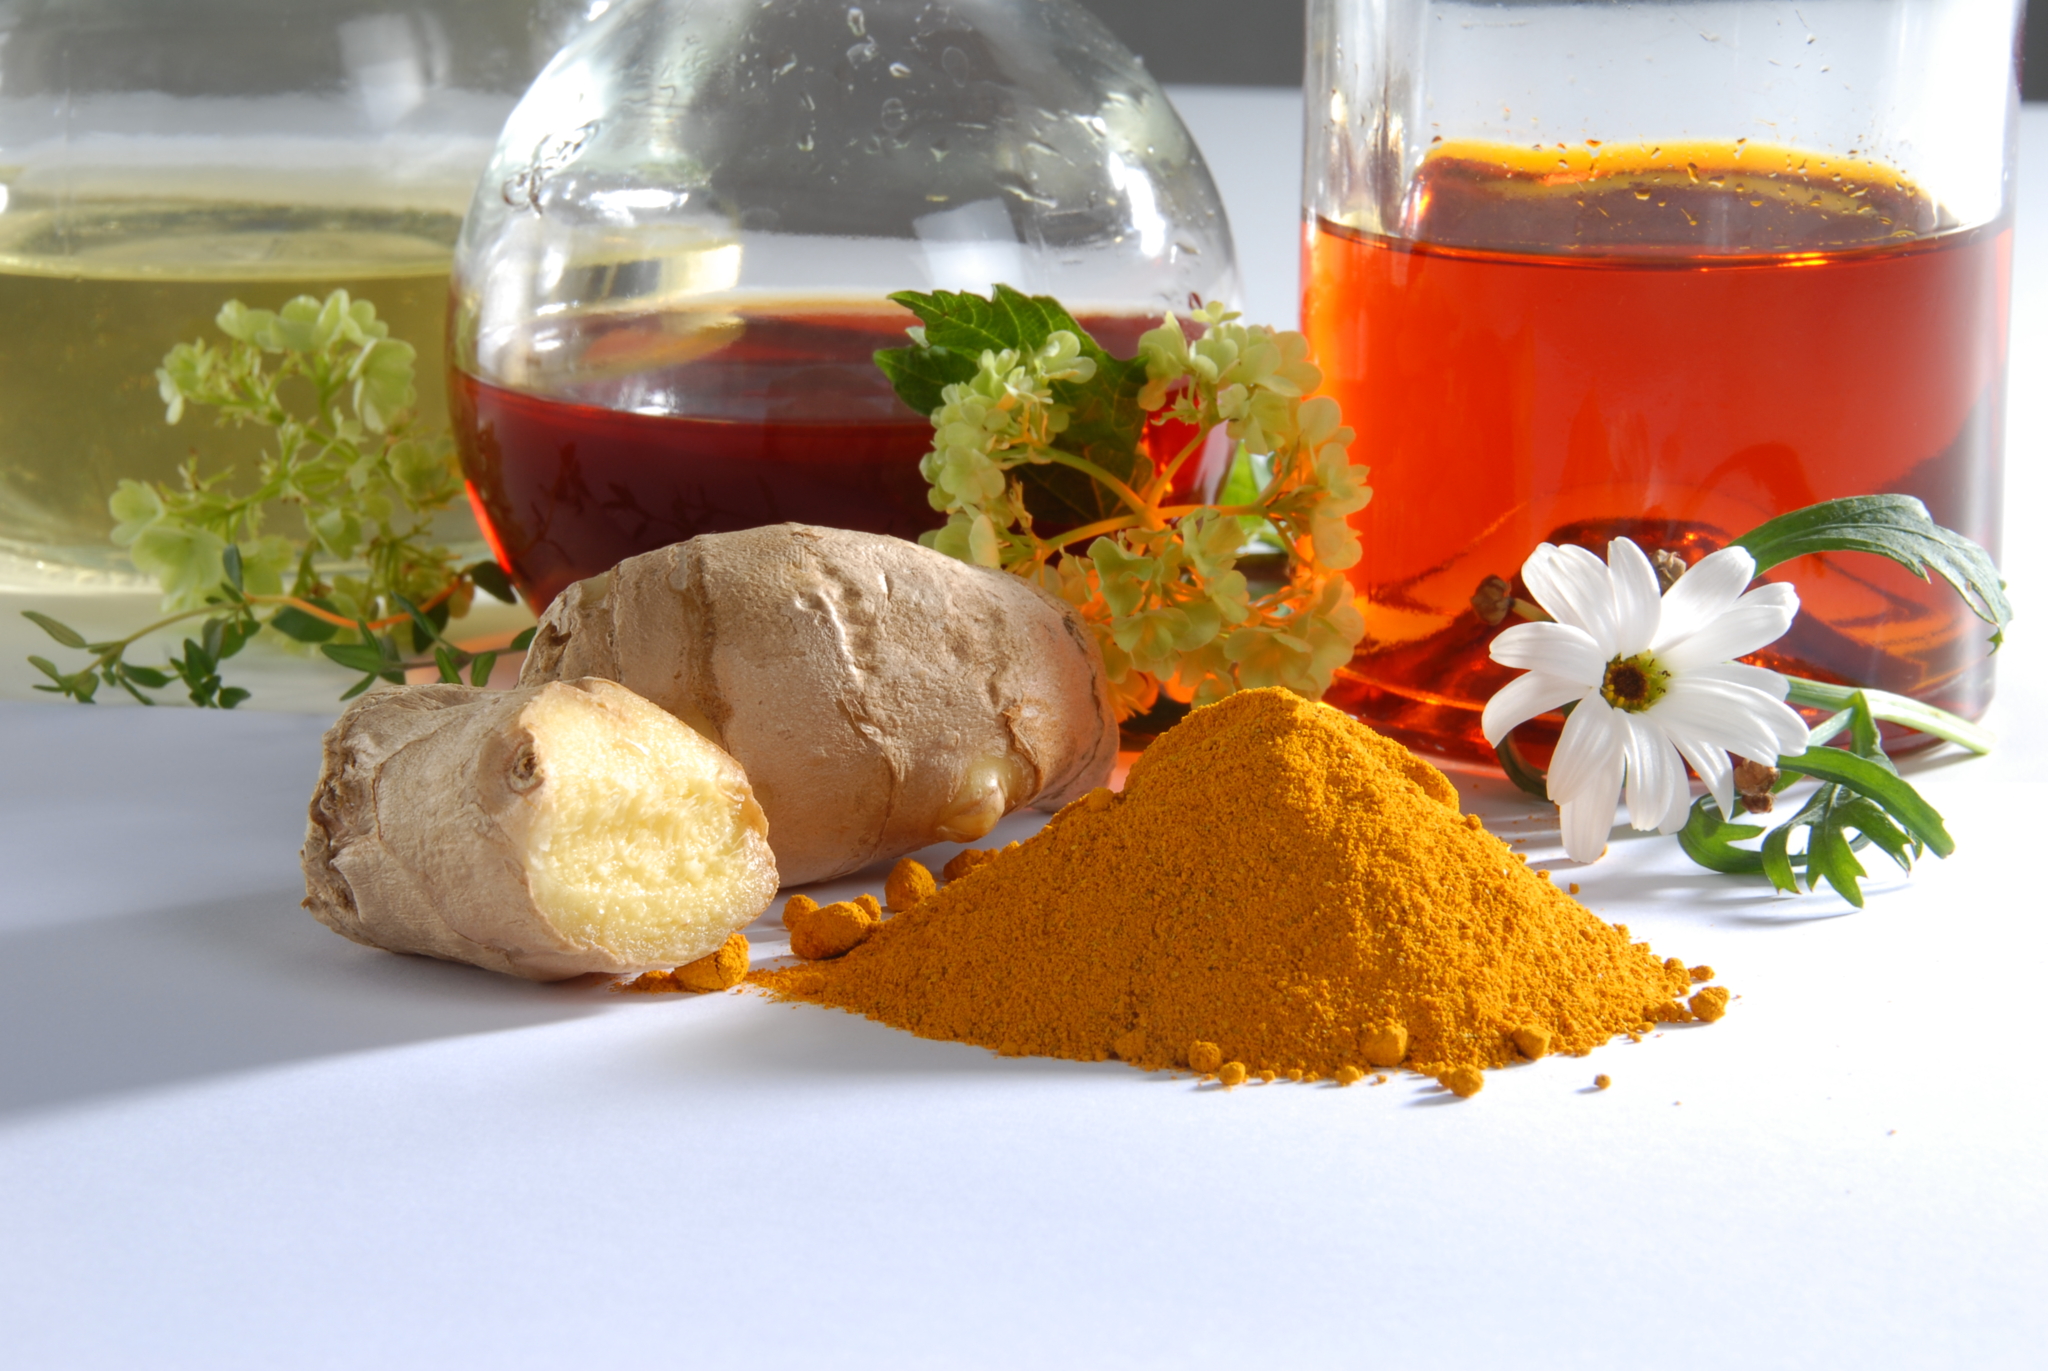 The photo shows the ingredients of Paramirum, including high-quality oils and plant essences.